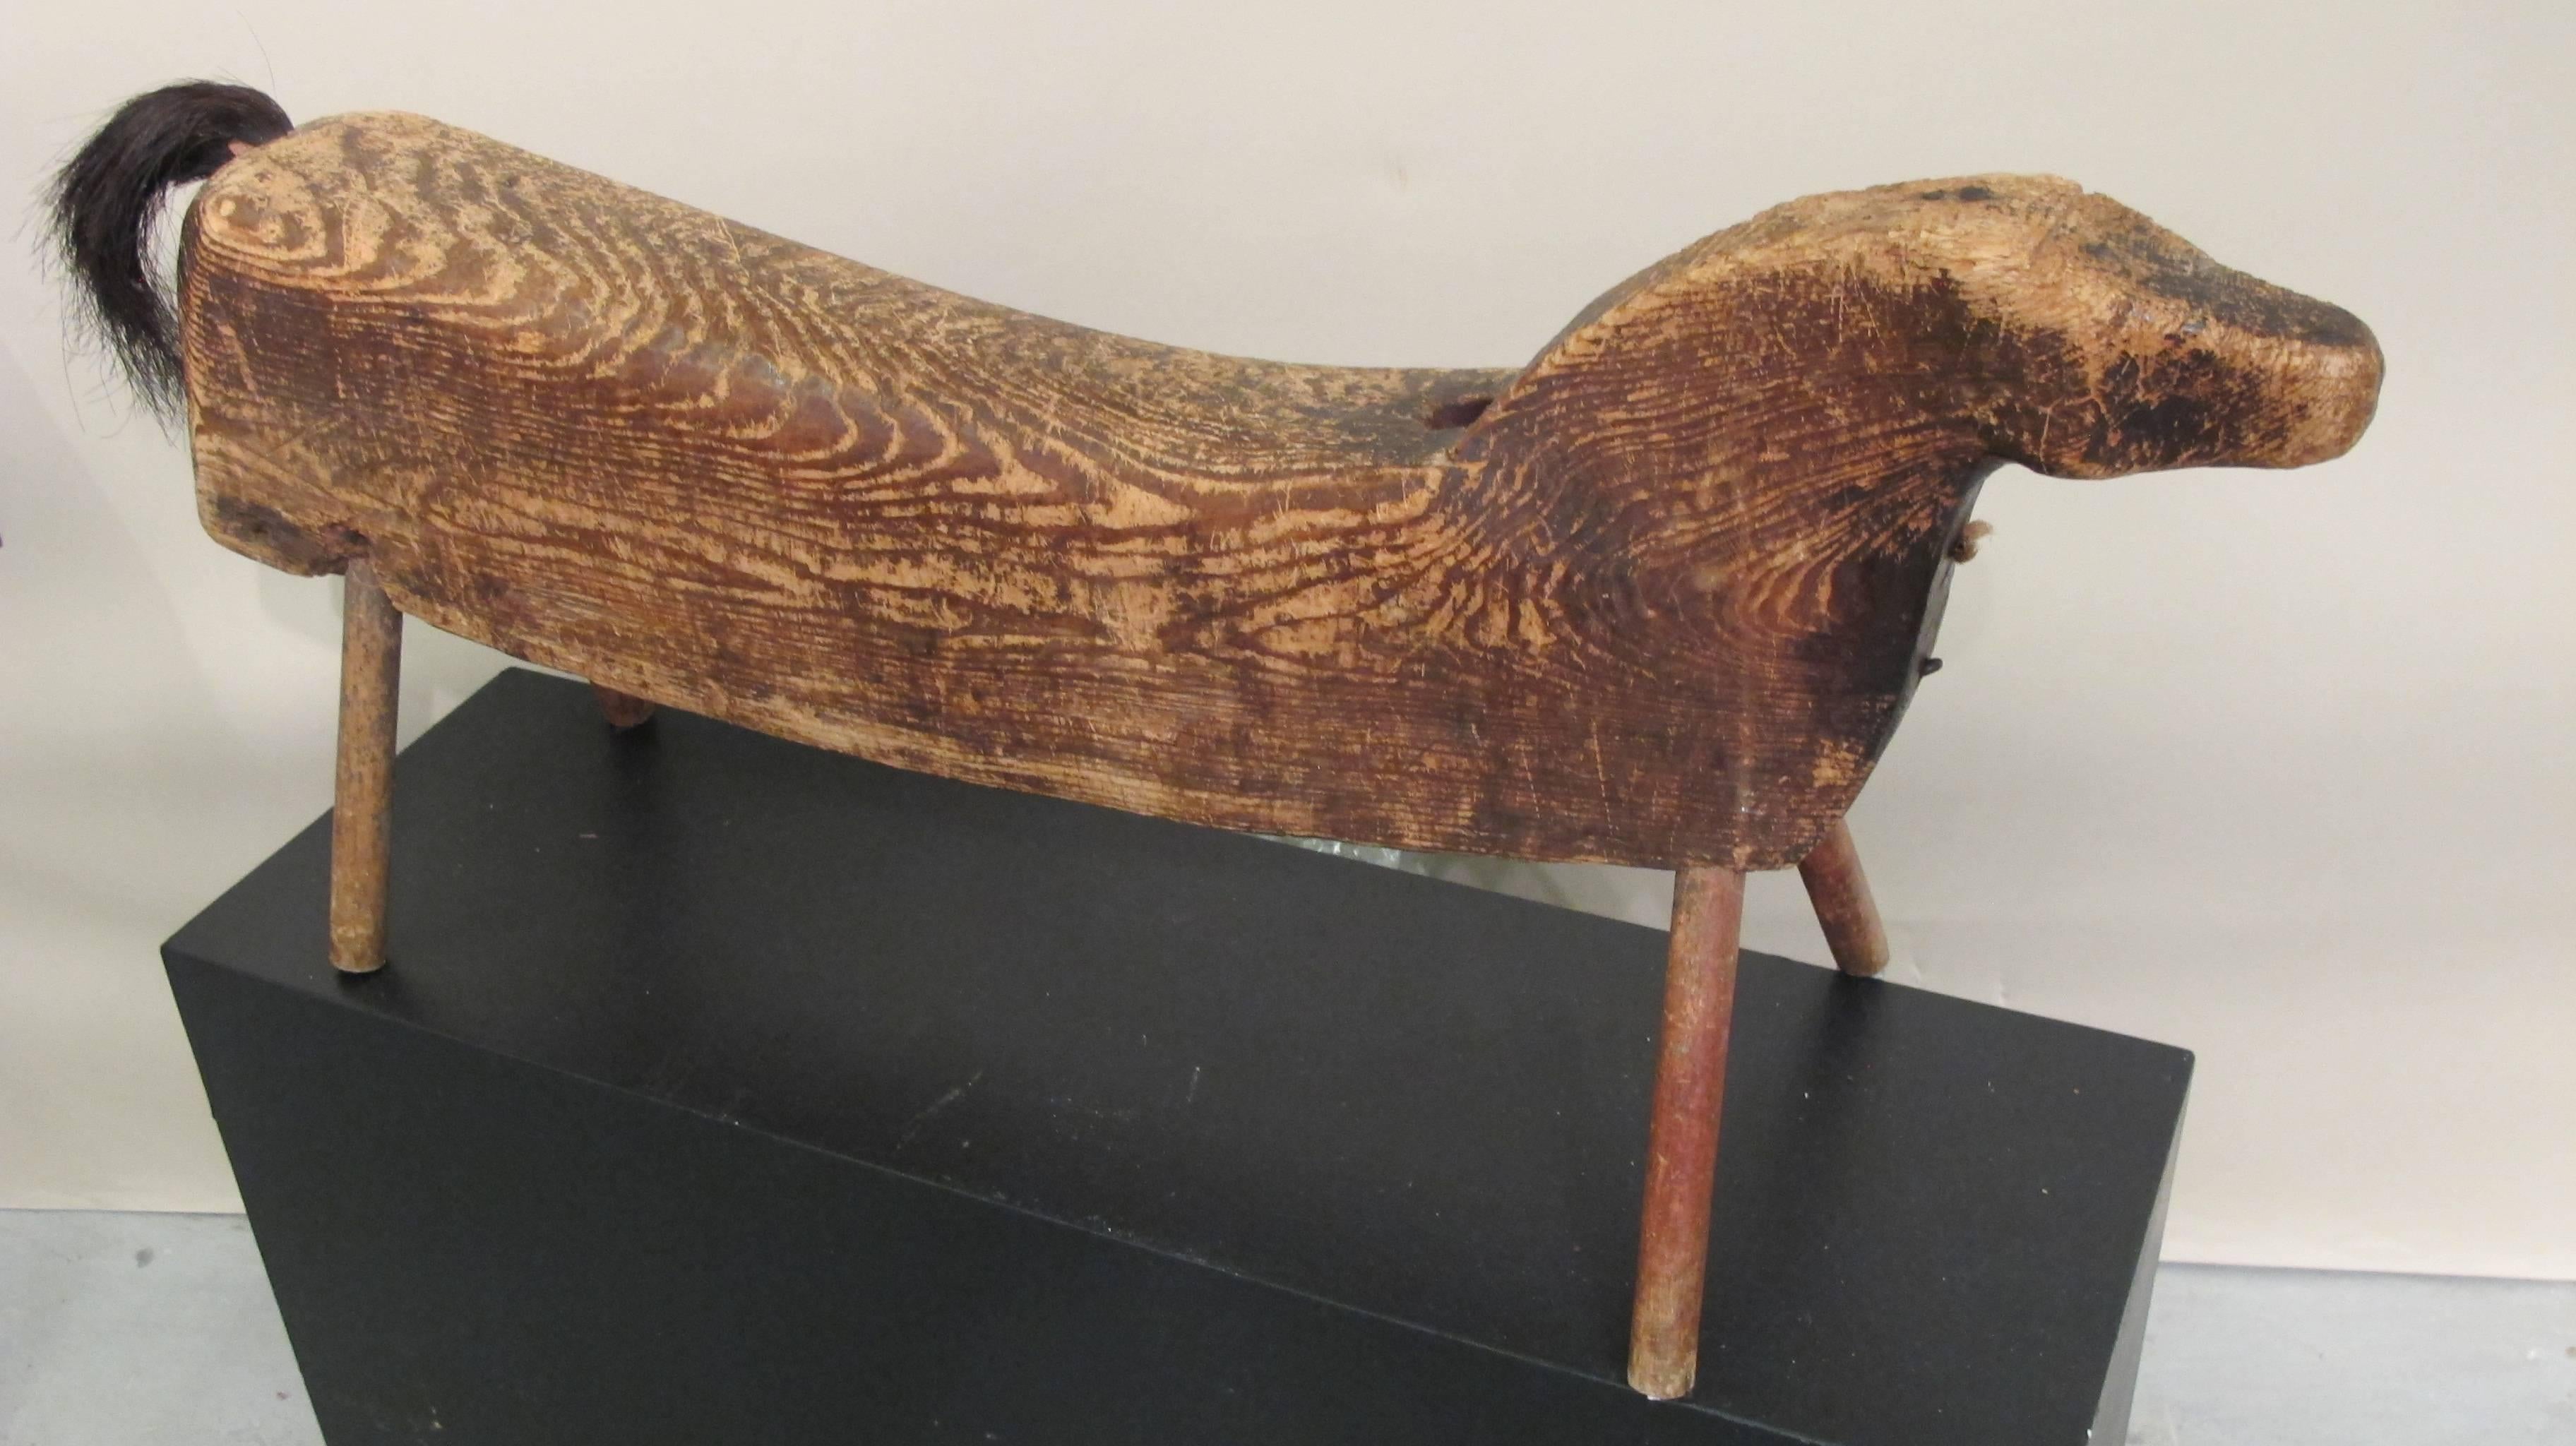 Carved wood horse with elongated body and horse tail. The young child would sit and ride on the horse supported by angled wood peg legs. The horse is a piece of sculpture by an unknown folk artist of the 19th century.